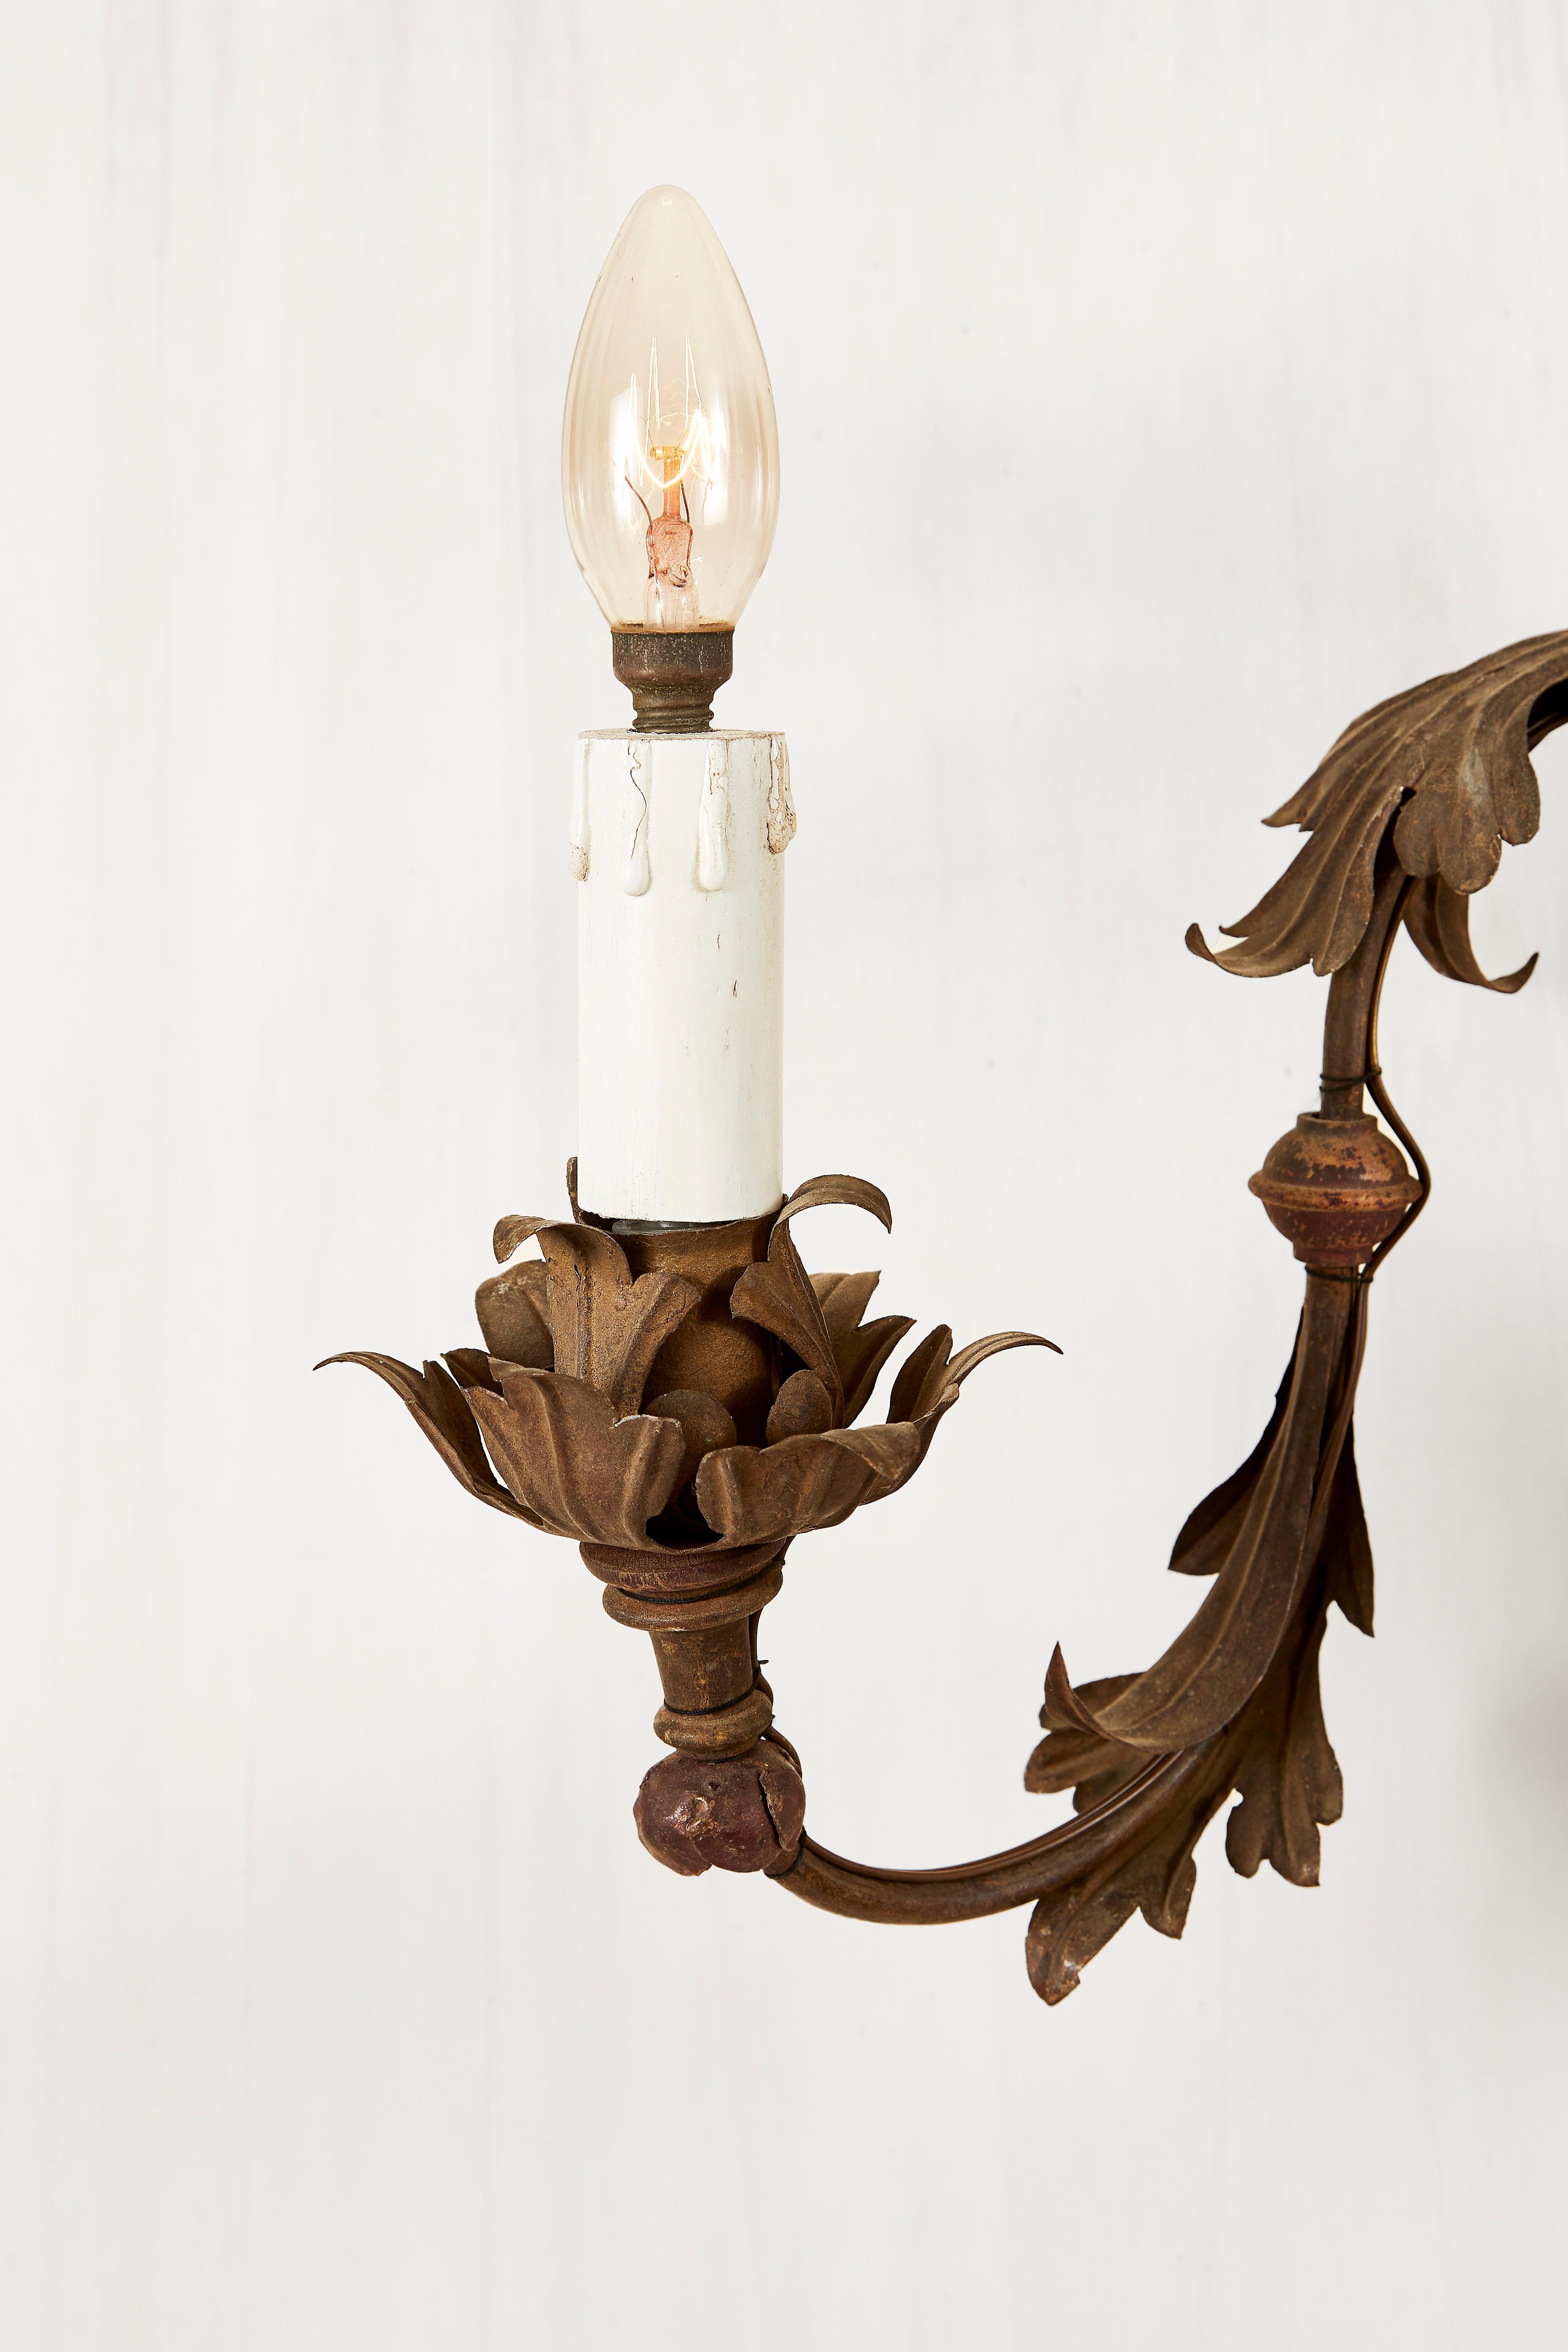 19th Century Pair of 19th-Century Italian Floral Sconces Hand-Forged Wrought Iron Wall Lights